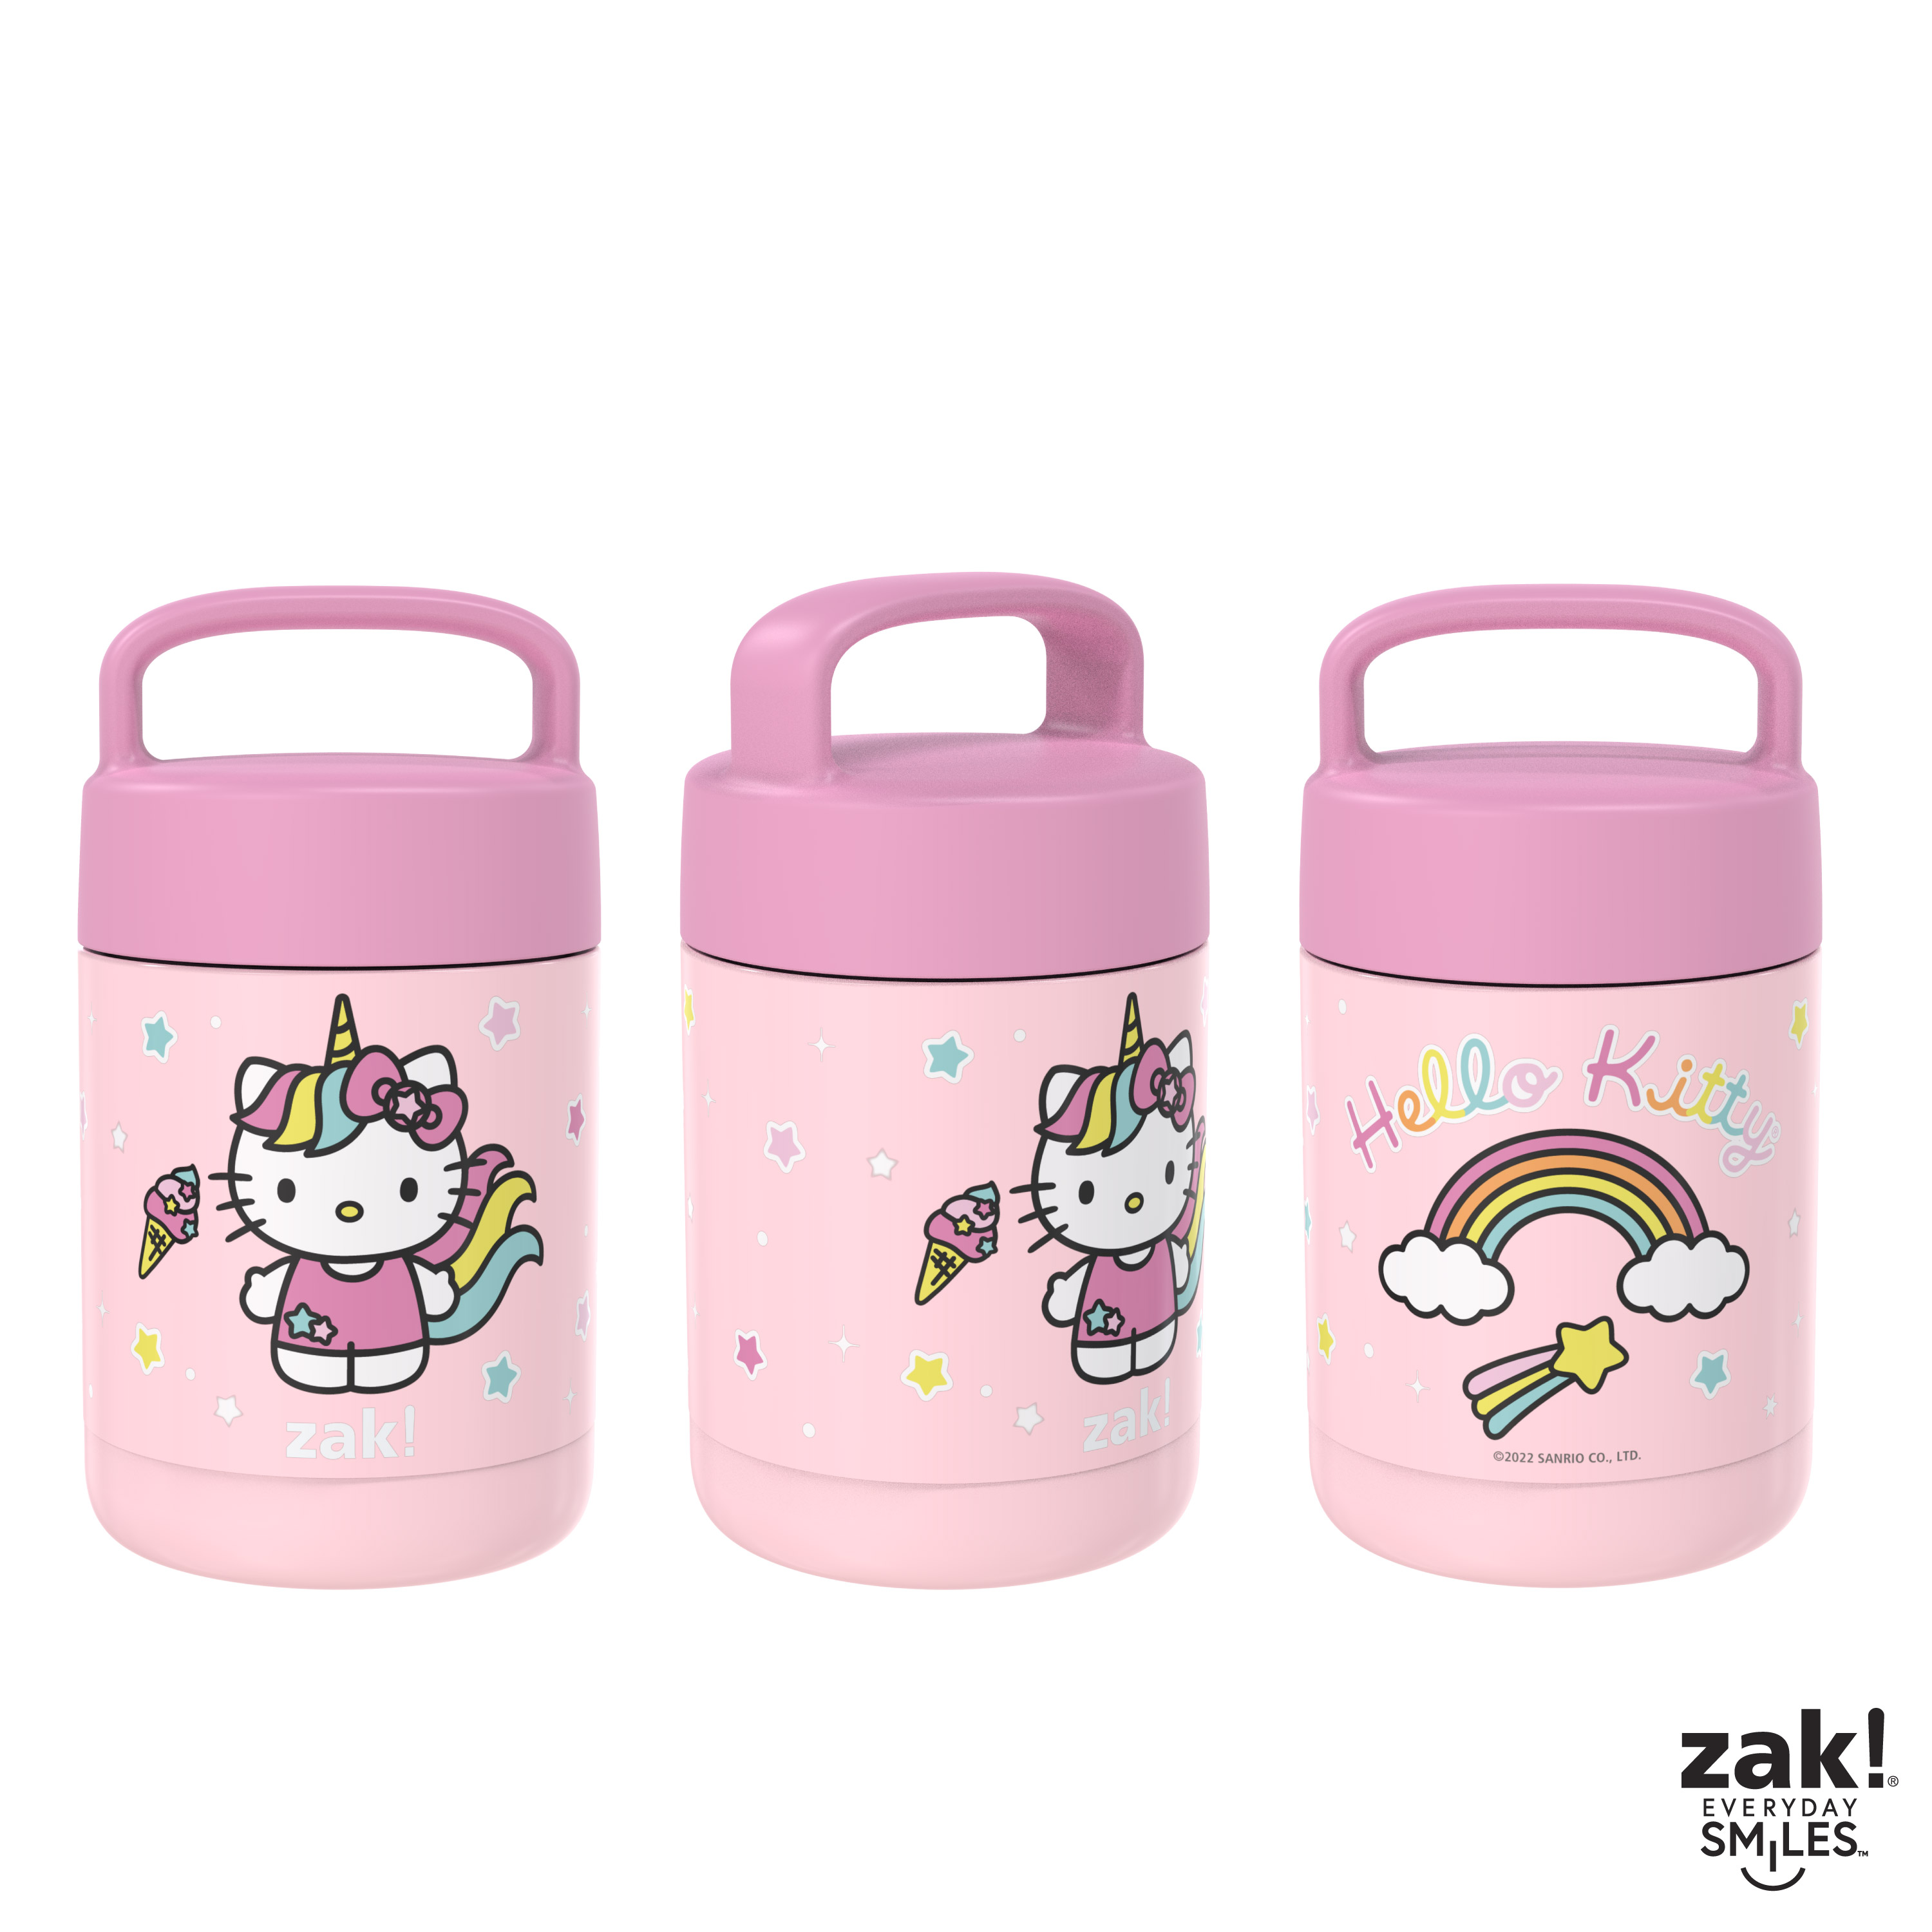 Sanrio Reusable Vacuum Insulated Stainless Steel Food Container, Hello Kitty slideshow image 4